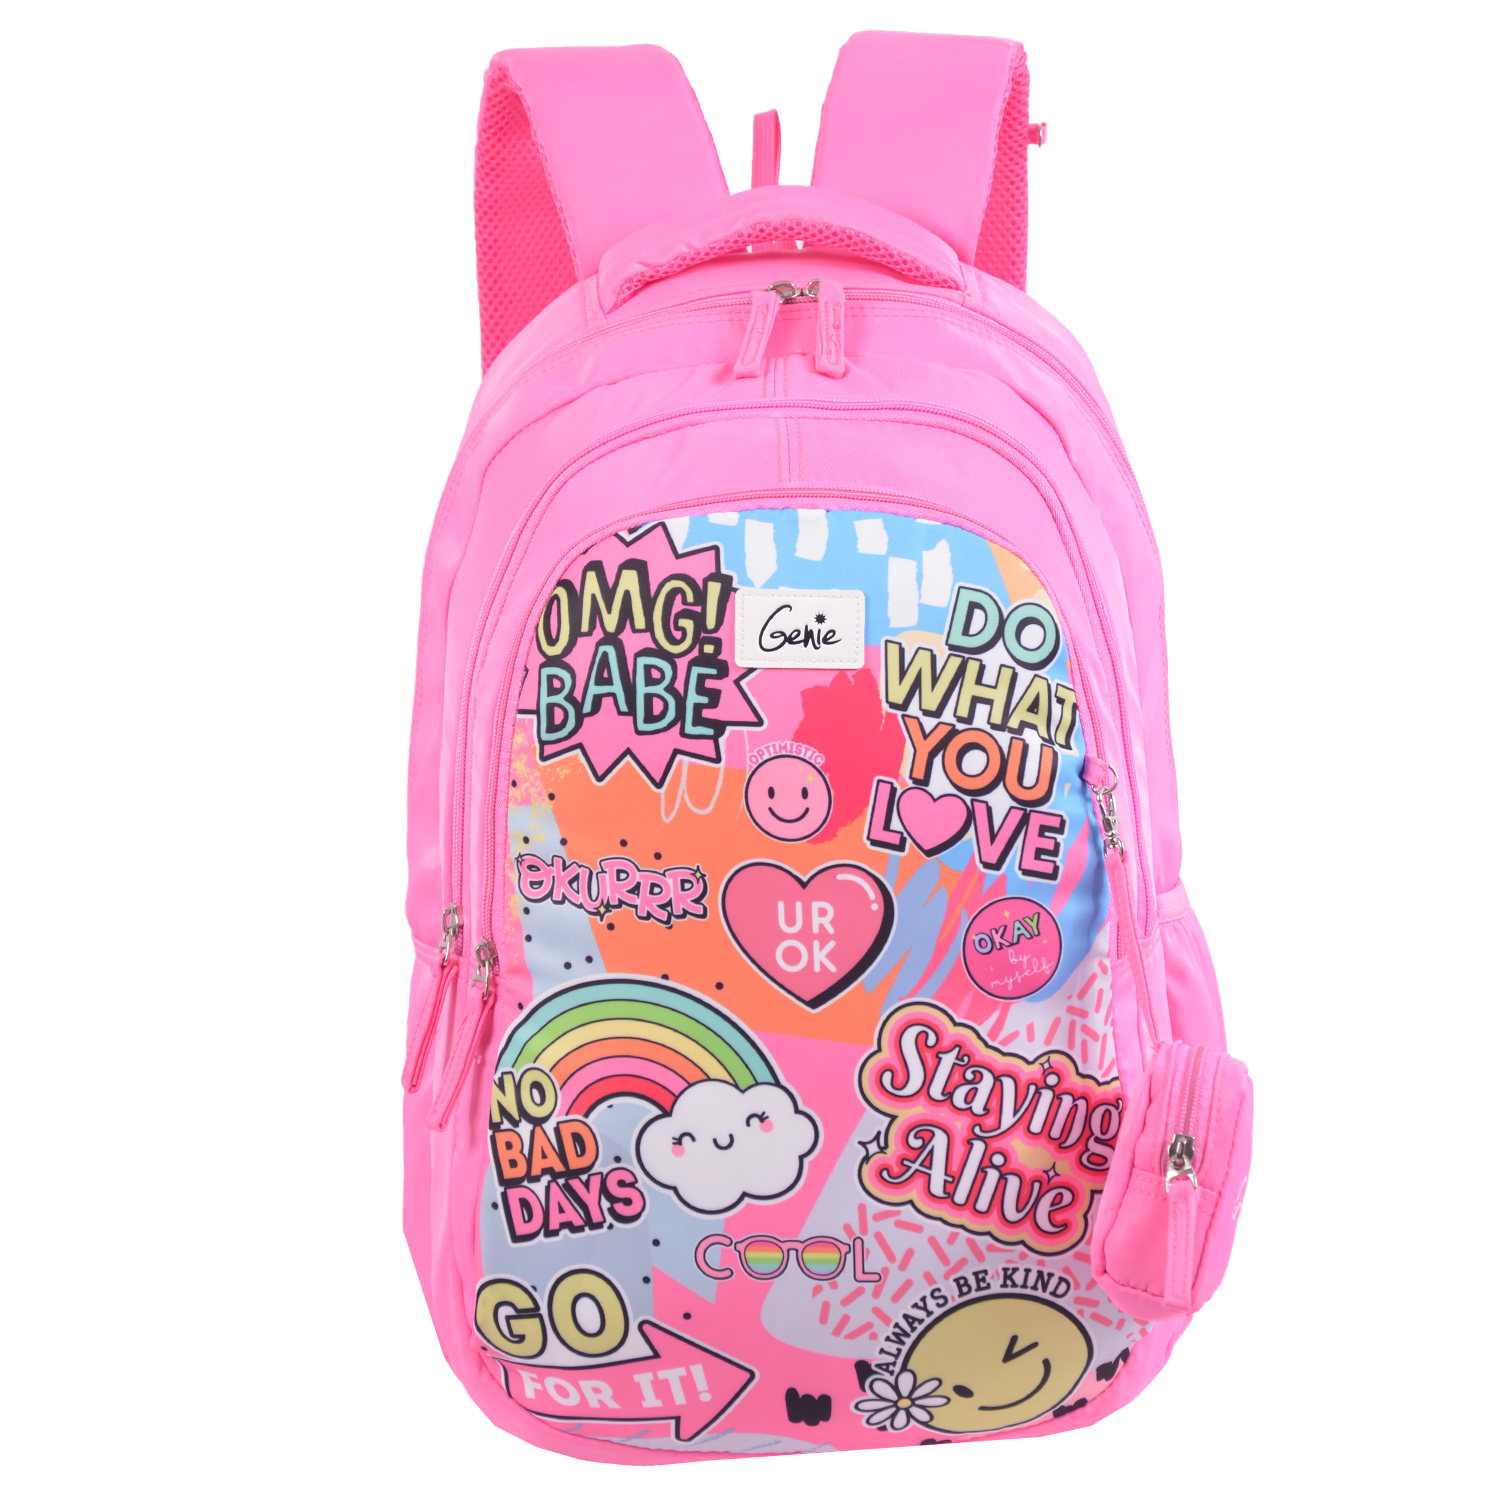 RoshanBags_GENIE 36L BACKPACK COOL 19 PINK WITH POUCH